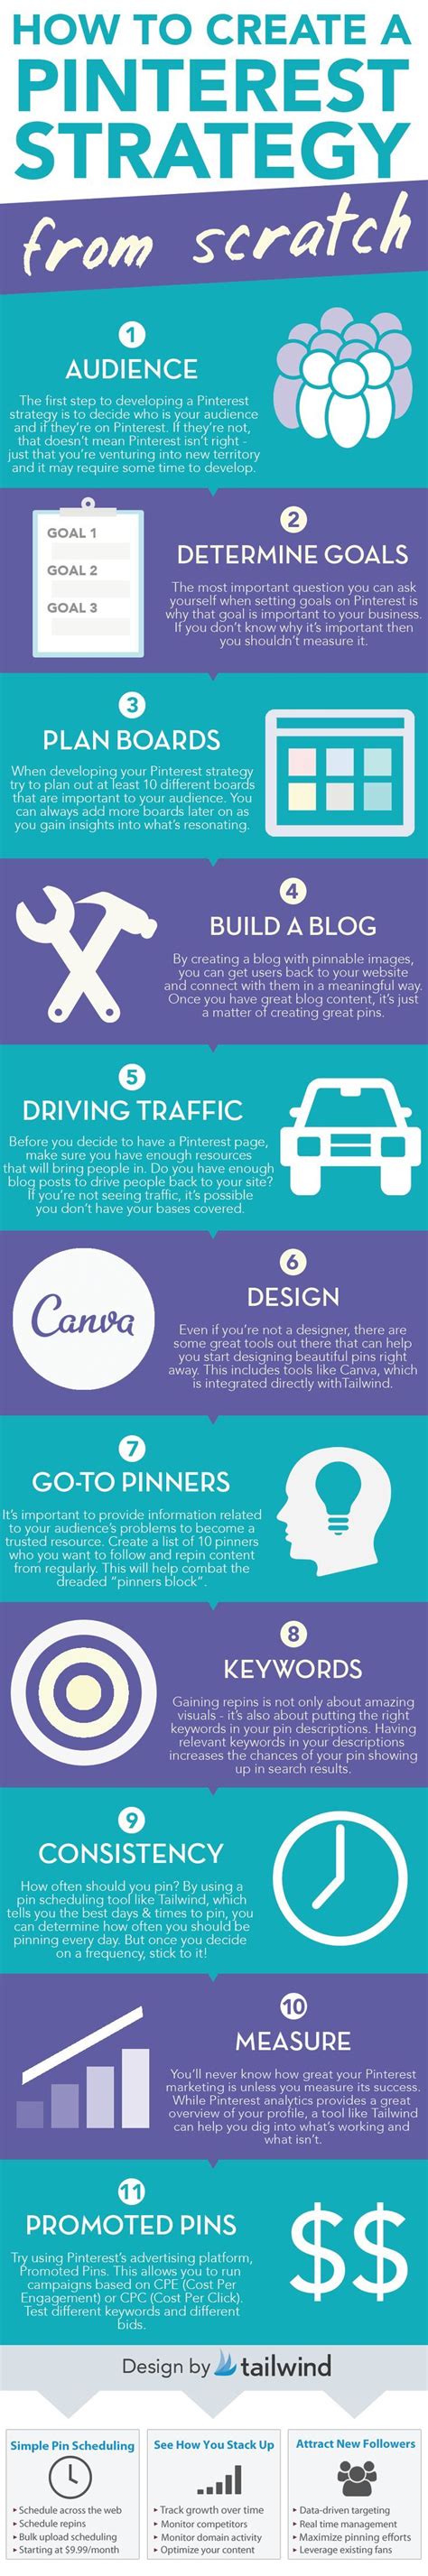 11 steps to rock your pinterest strategy infographic internet marketing social media tips